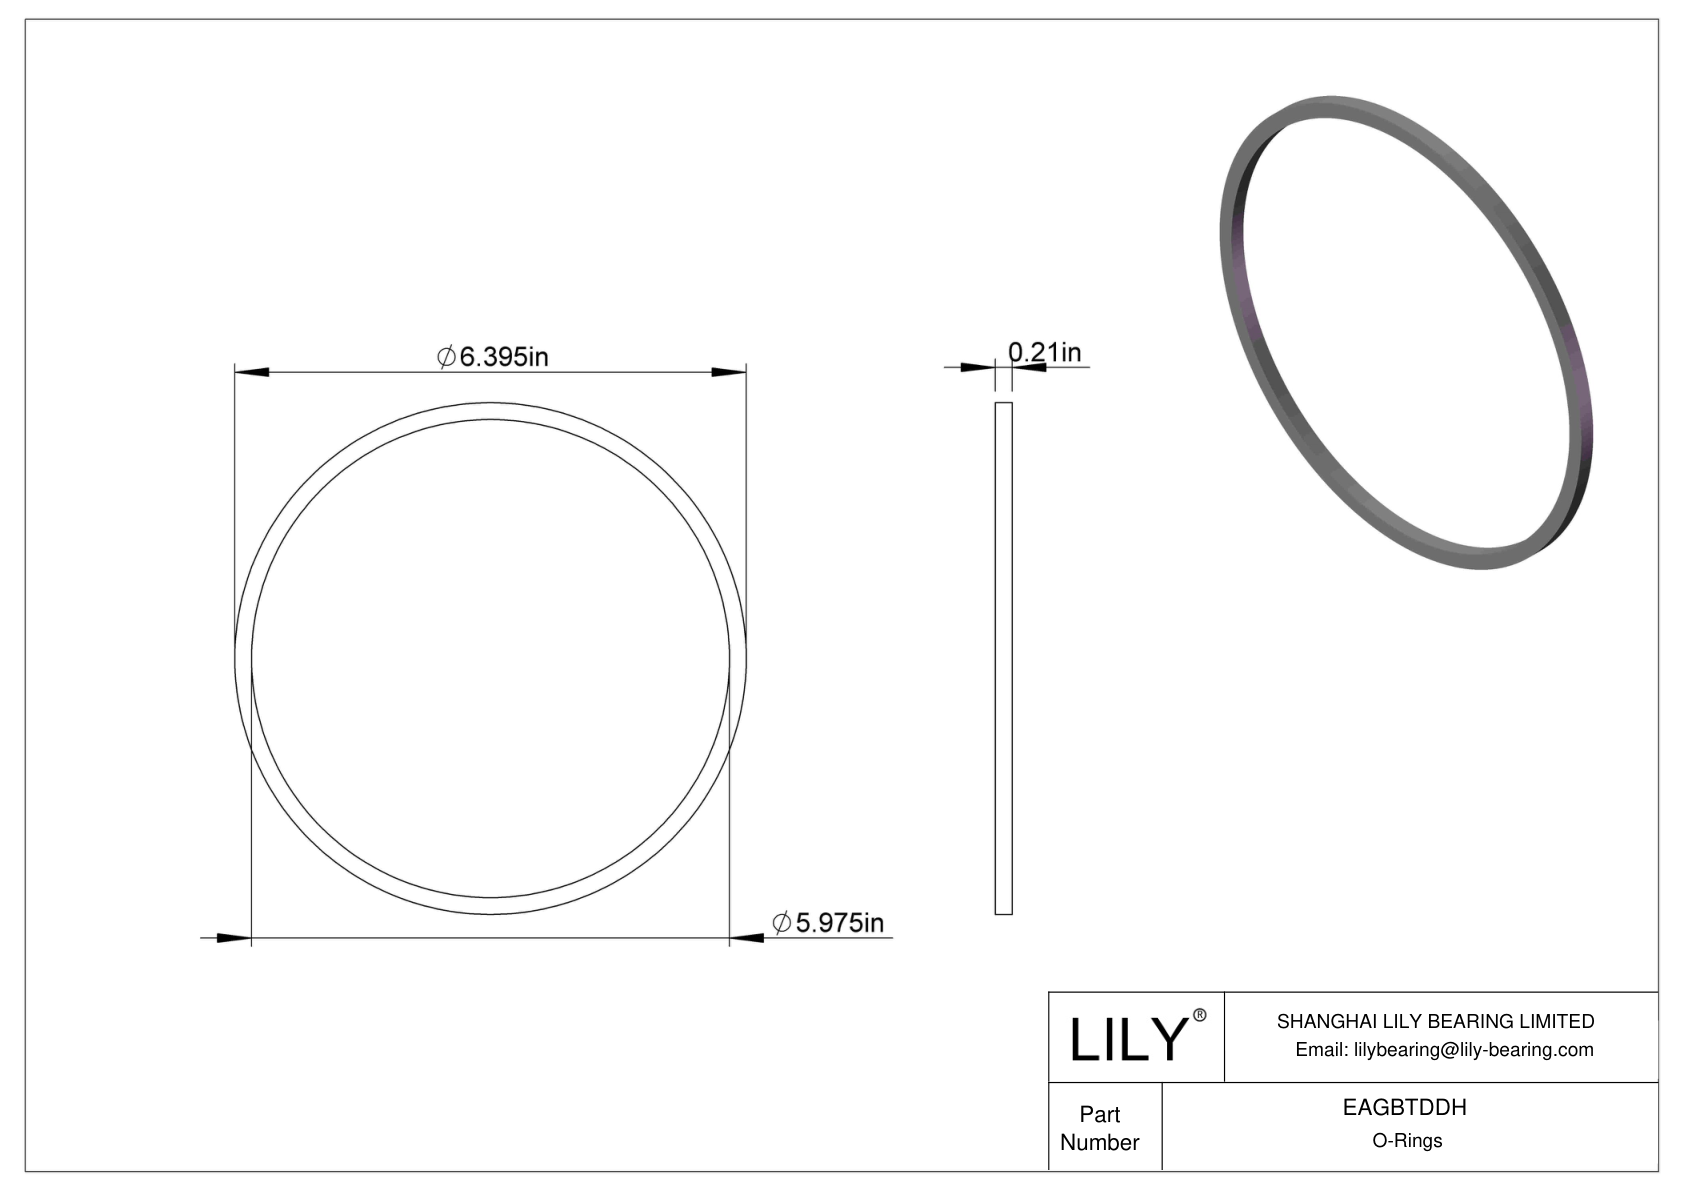 EAGBTDDH Oil Resistant O-Rings Square cad drawing